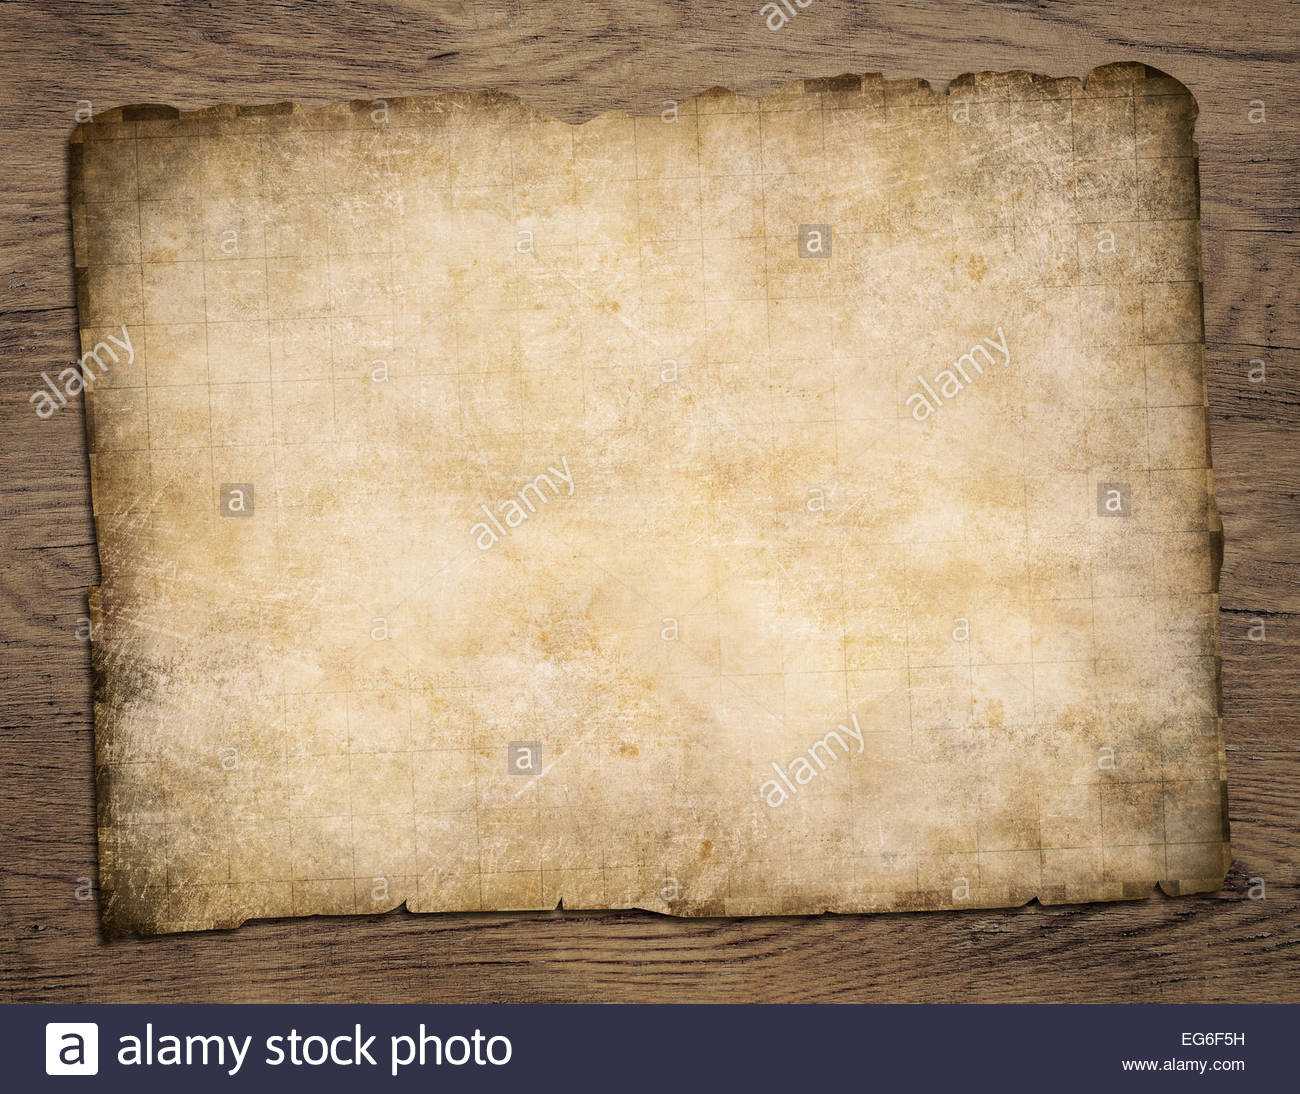 Old Blank Parchment Treasure Map On Wooden Table Stock Photo For Blank Pirate Map Template